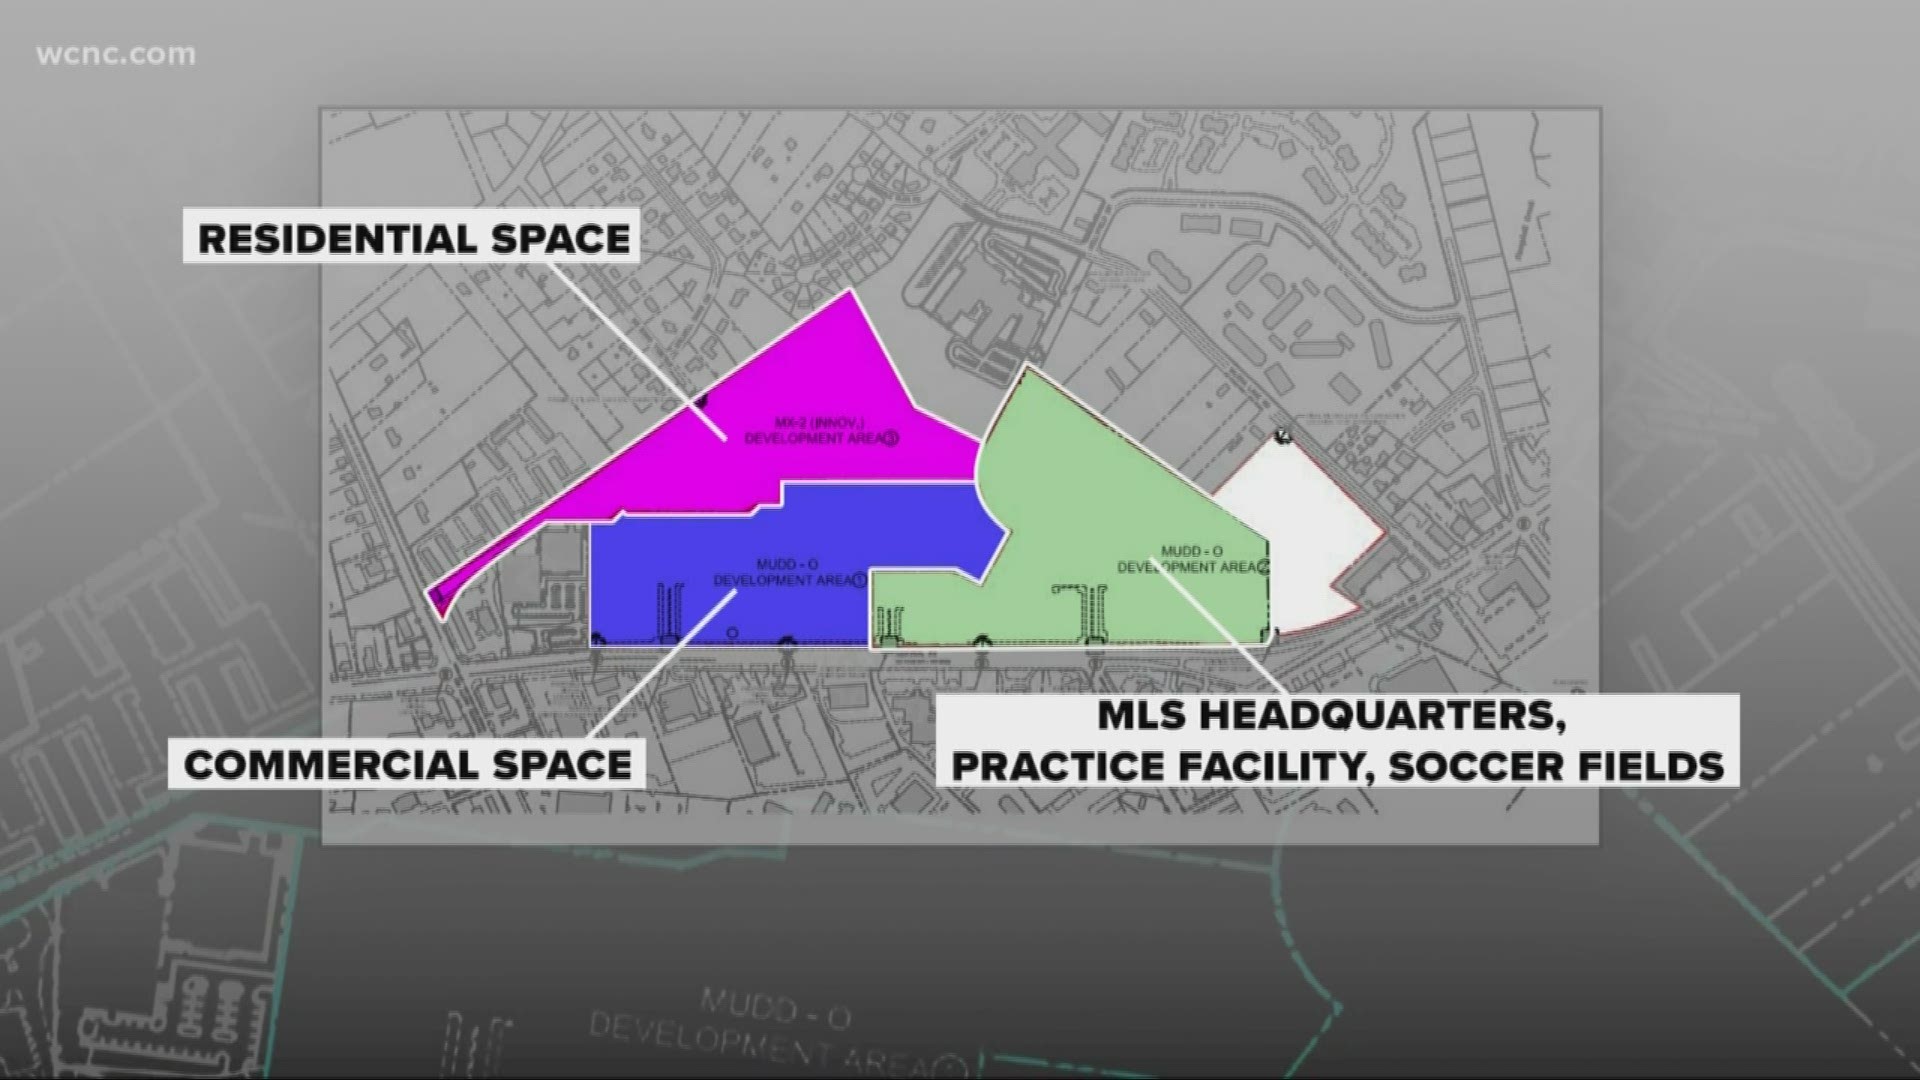 The 78-acre lot would be home to the new Major League Soccer team's headquarters, as well as soccer fields and commercial space.